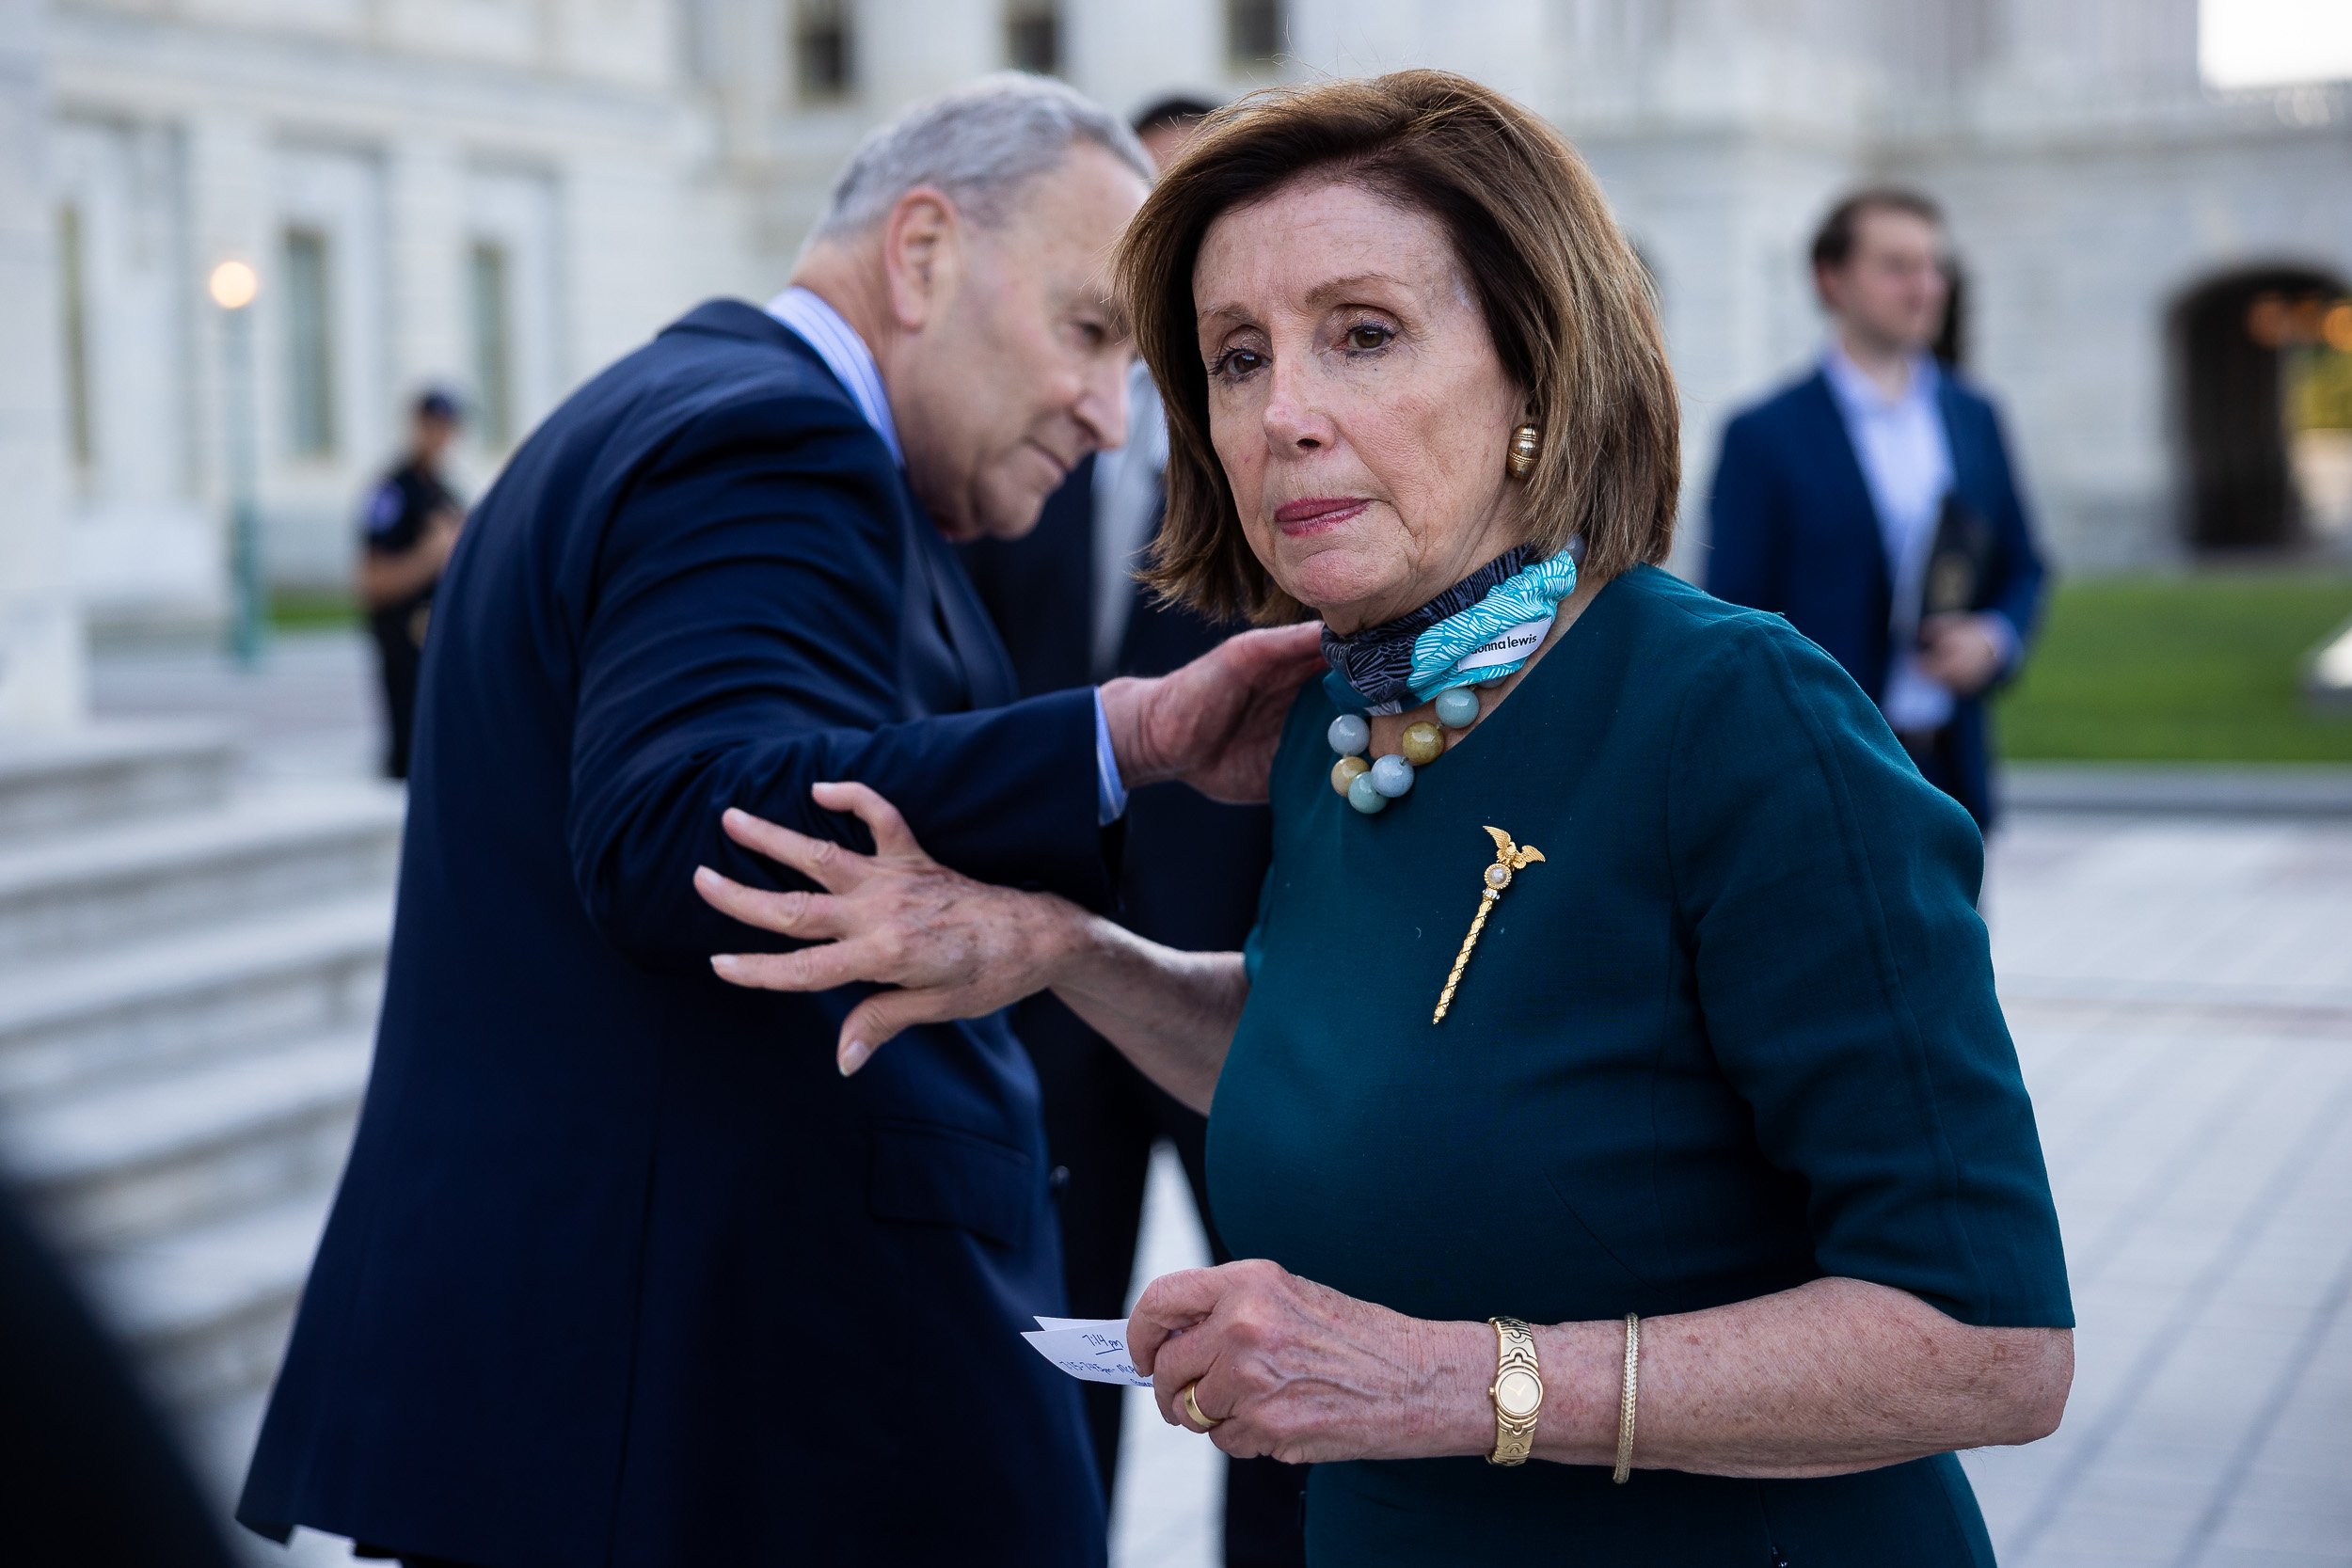  House Speaker Nancy Pelosi (D-Calif.) and Senate Majority Leader Chuck Schumer (D-N.Y.) part ways after a ceremony commemorating 600,000 American lives lost to COVID-19 outside the U.S. Capitol June 14, 2021. 